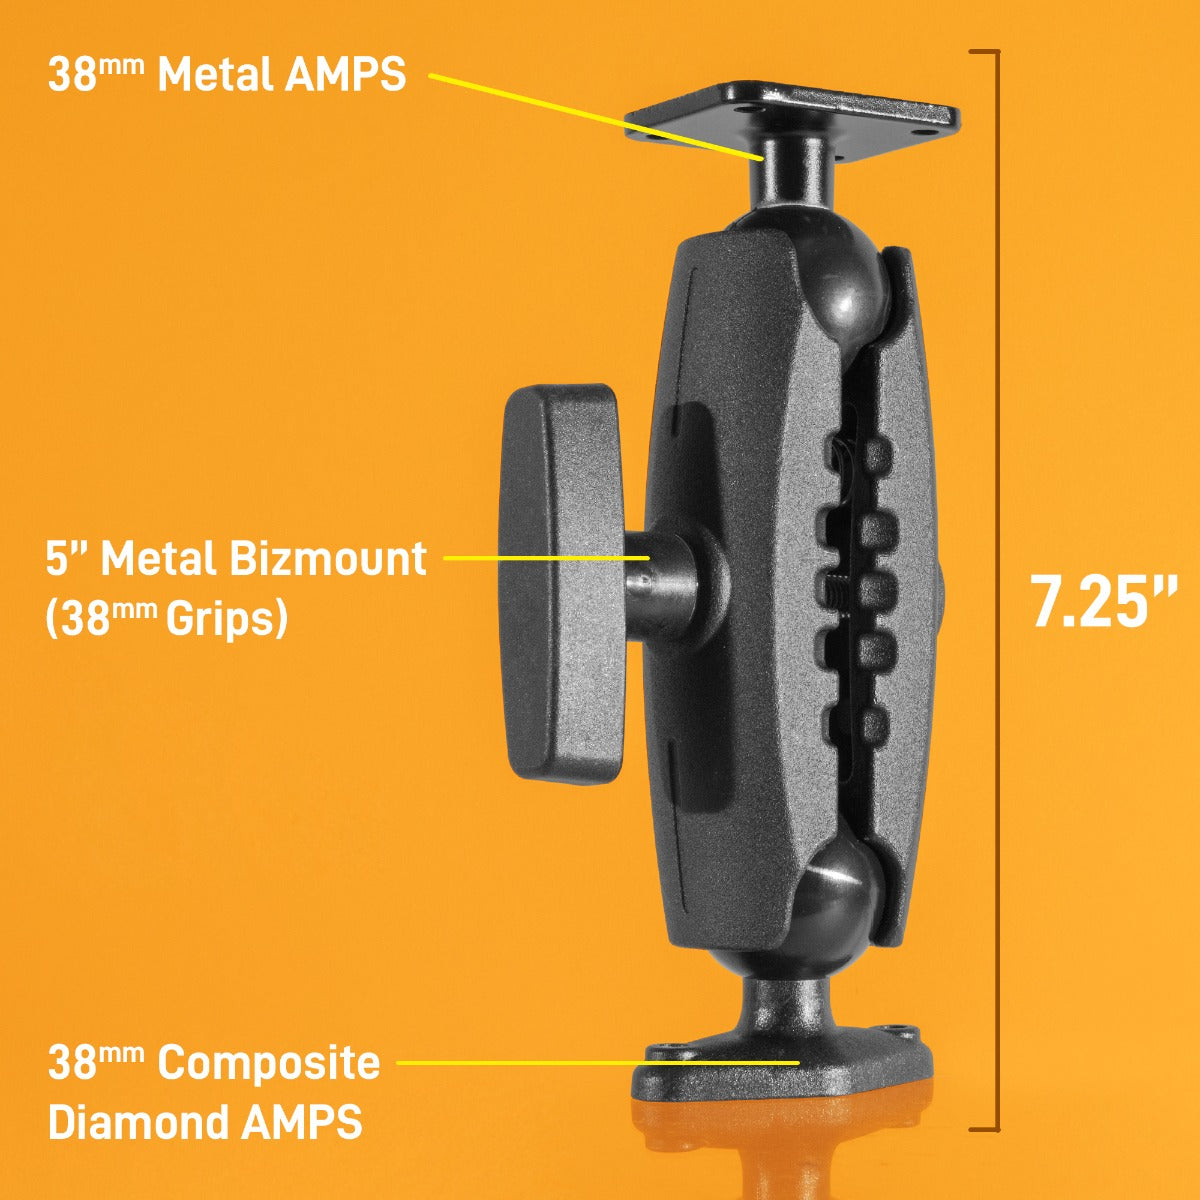 iBOLT™ 38mm / 1.5 inch Metal AMPS to Composite Diamond AMPS Drill Base Mount